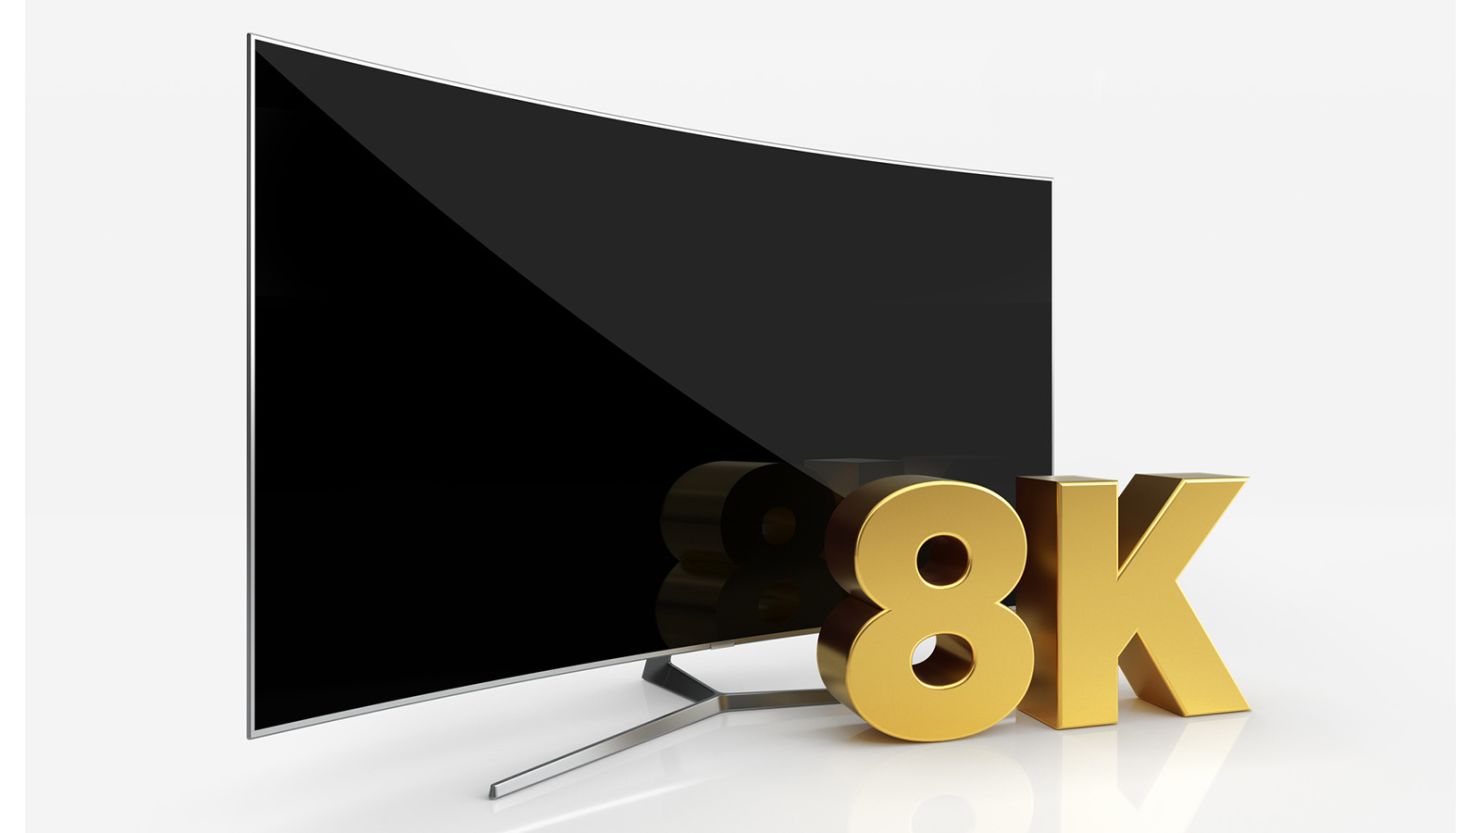 We Tested a $30,000 8K TV. Here's What We'd Buy Instead.